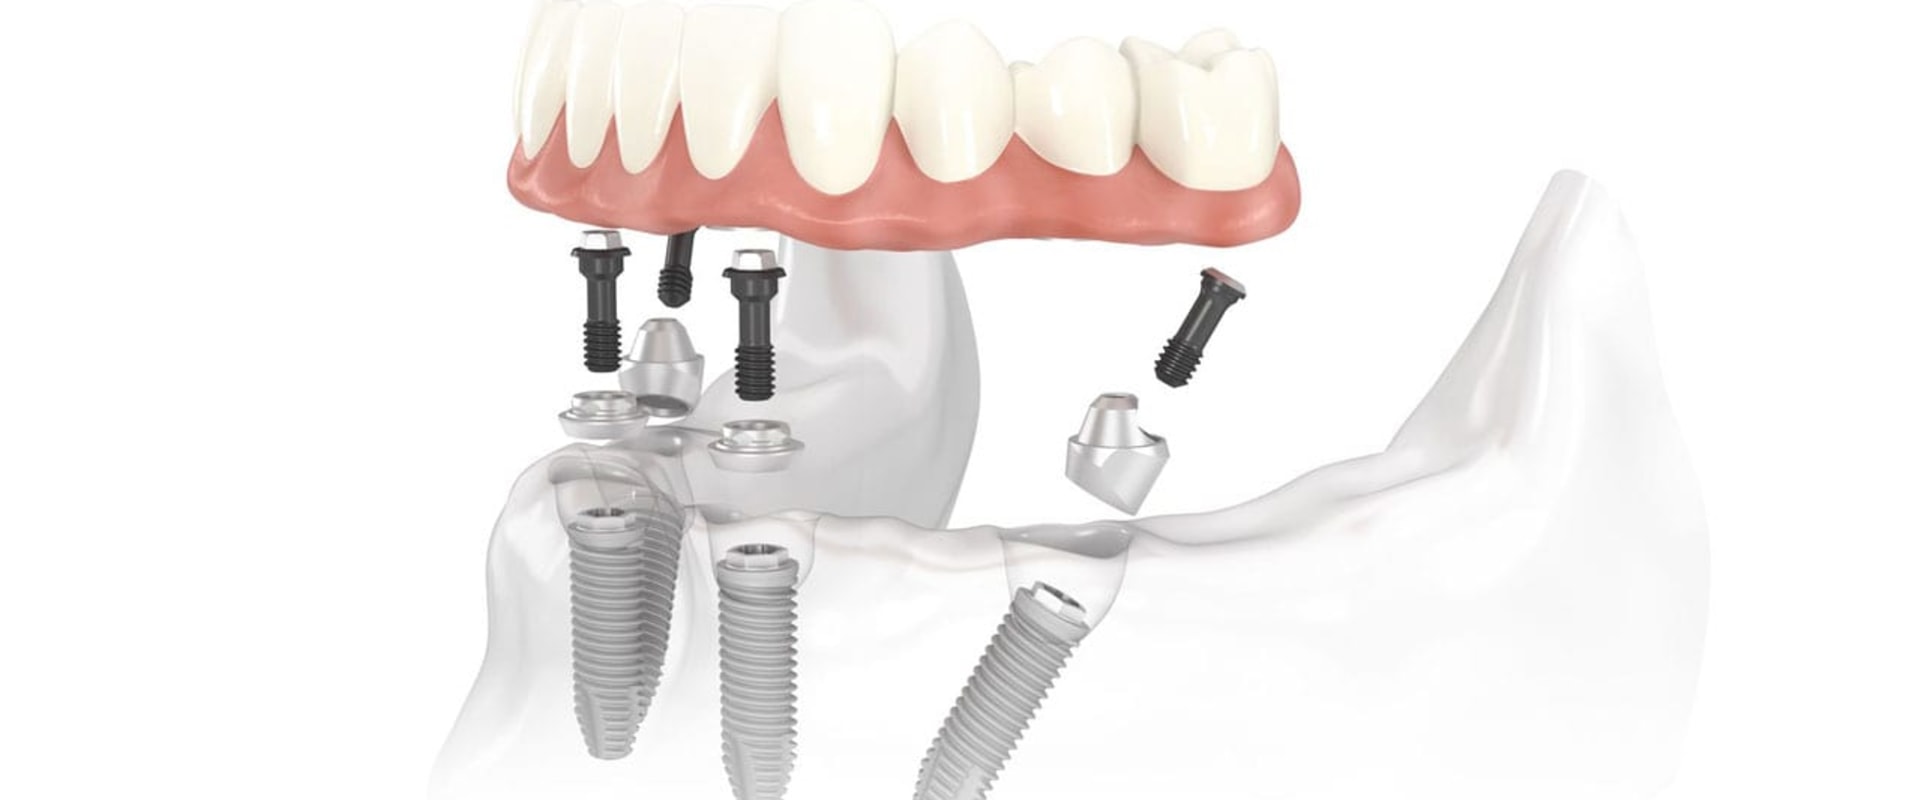 Do You Need a Bone Graft for All-on-4 Dental Implants?